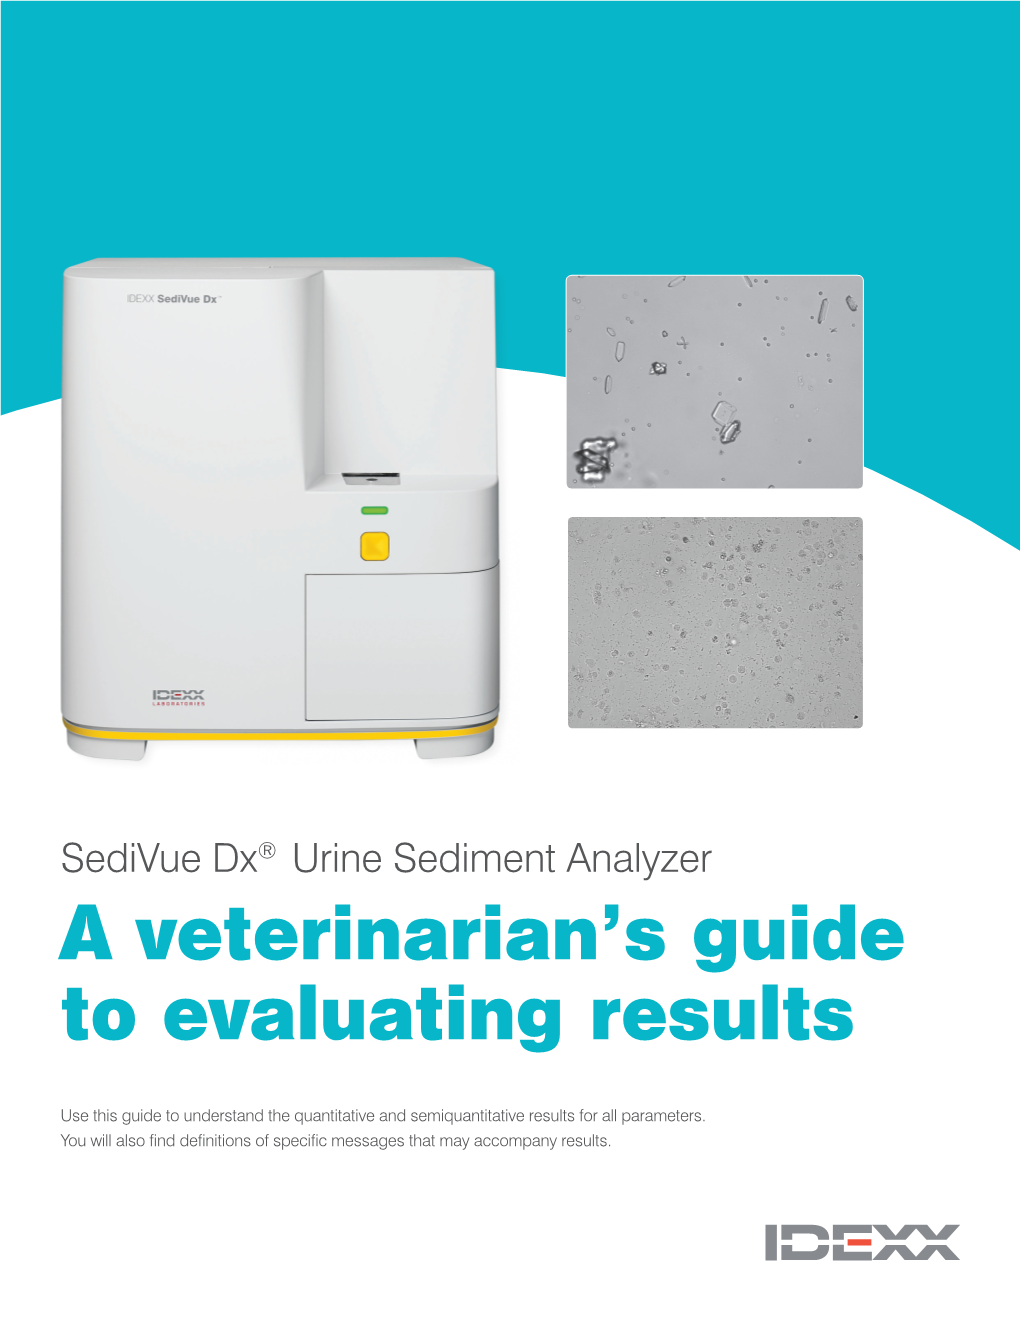 A Veterinarian's Guide to Evaluating Results